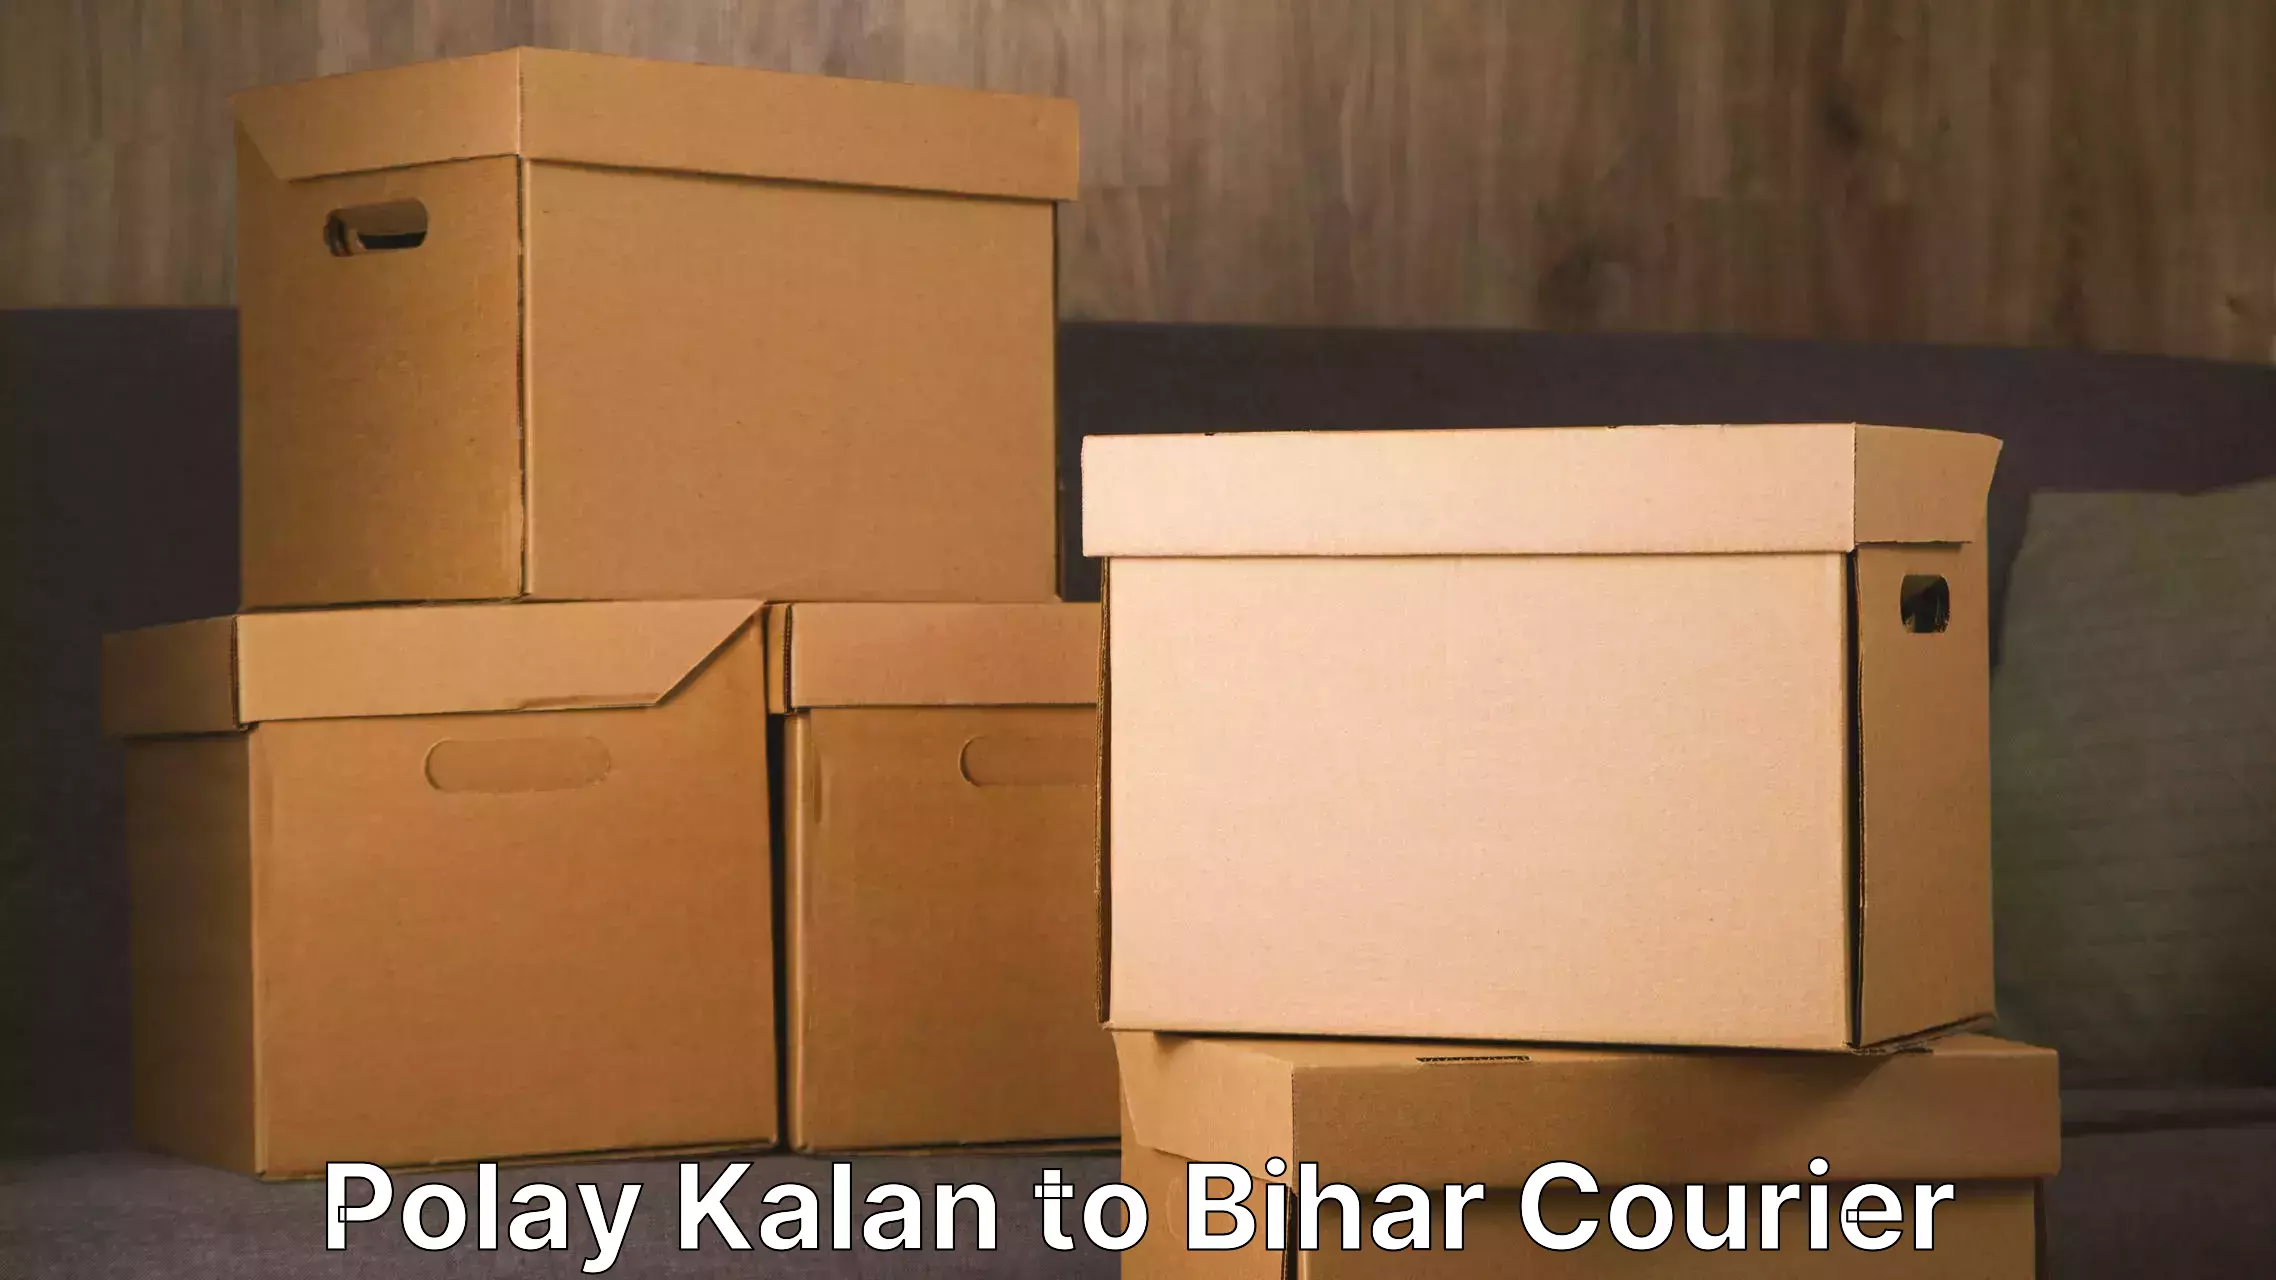 Quality moving and storage in Polay Kalan to Saharsa